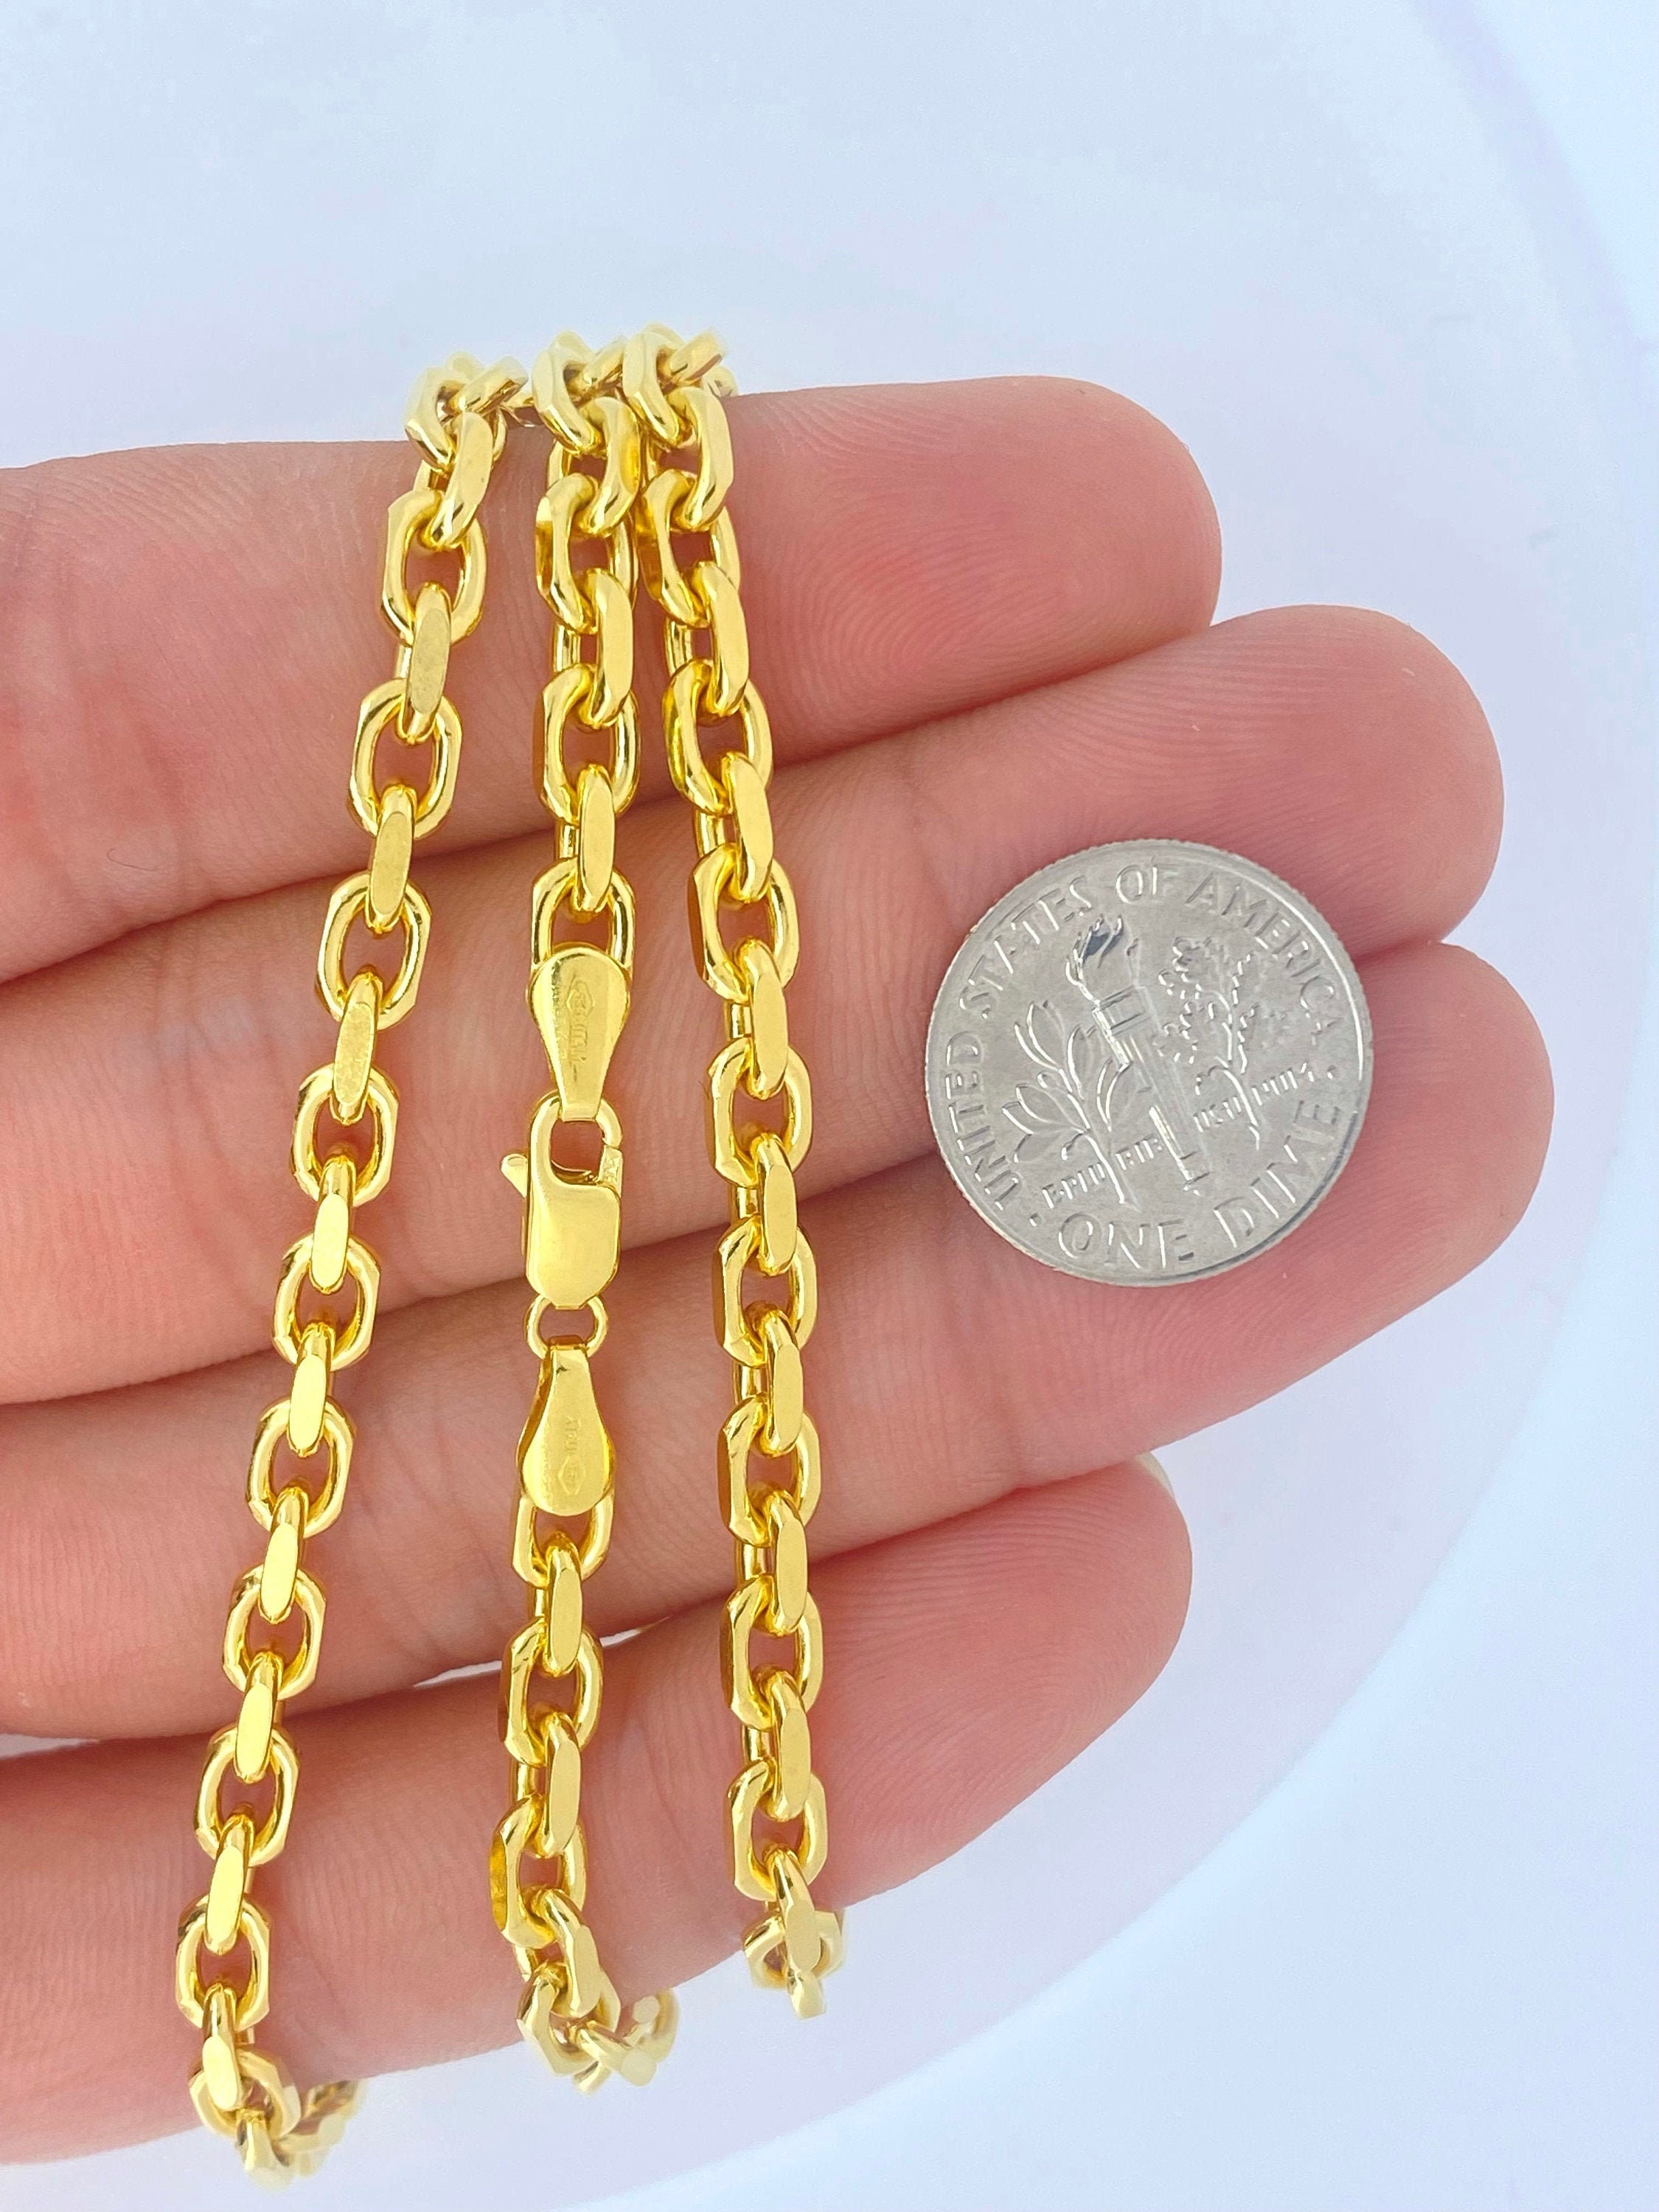 14K Gold Large Open Link Chain Necklace 14K Yellow Gold / 24 +$750